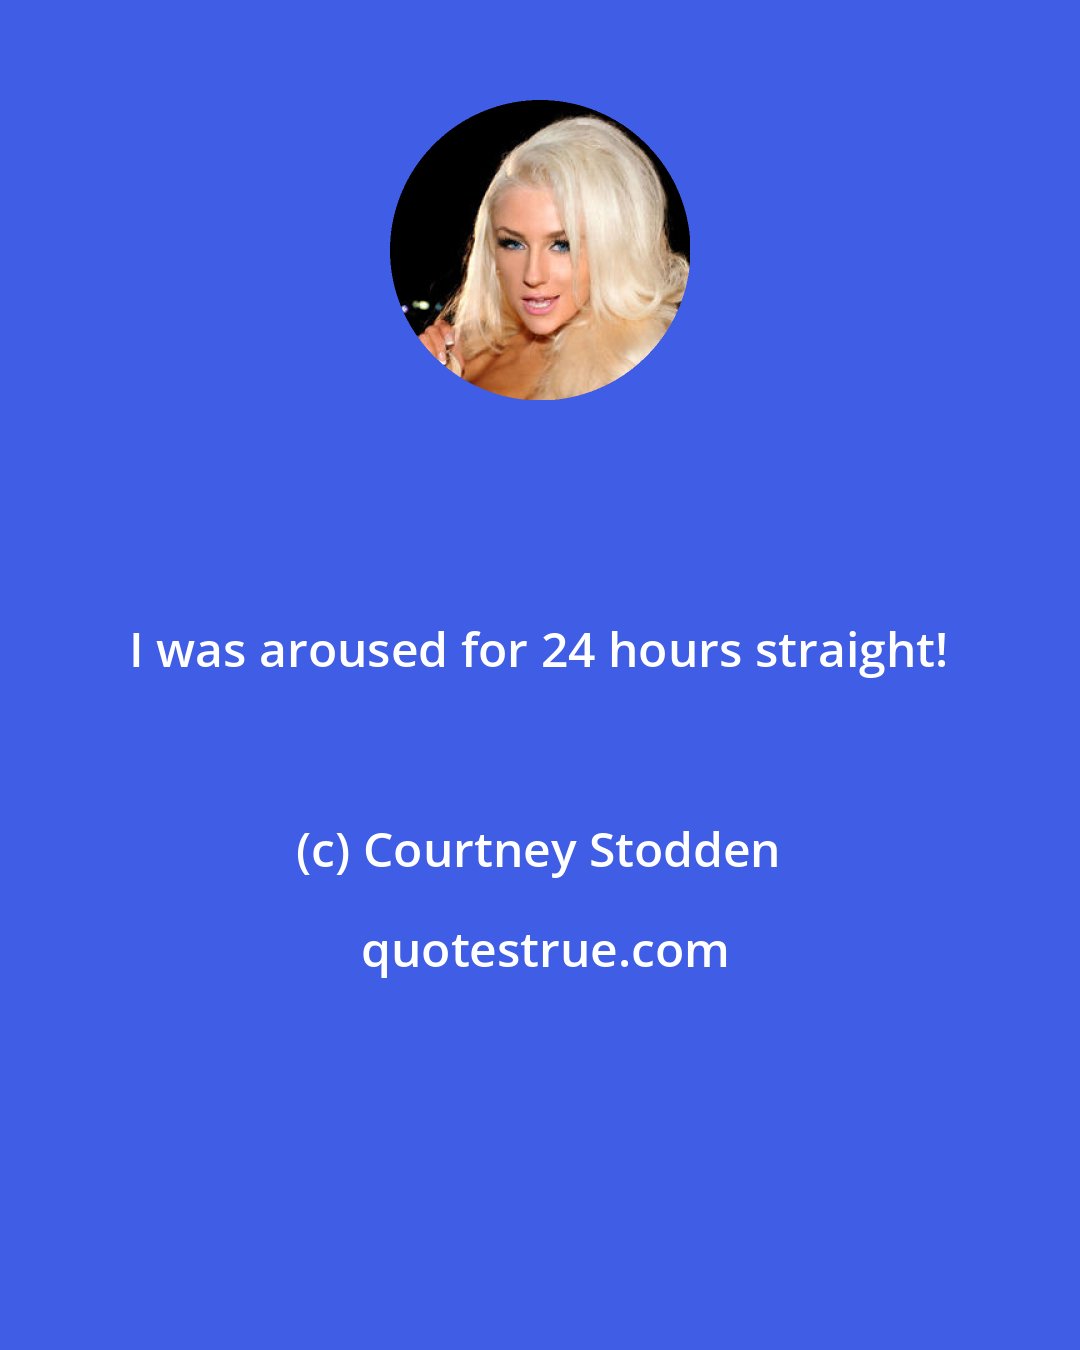 Courtney Stodden: I was aroused for 24 hours straight!